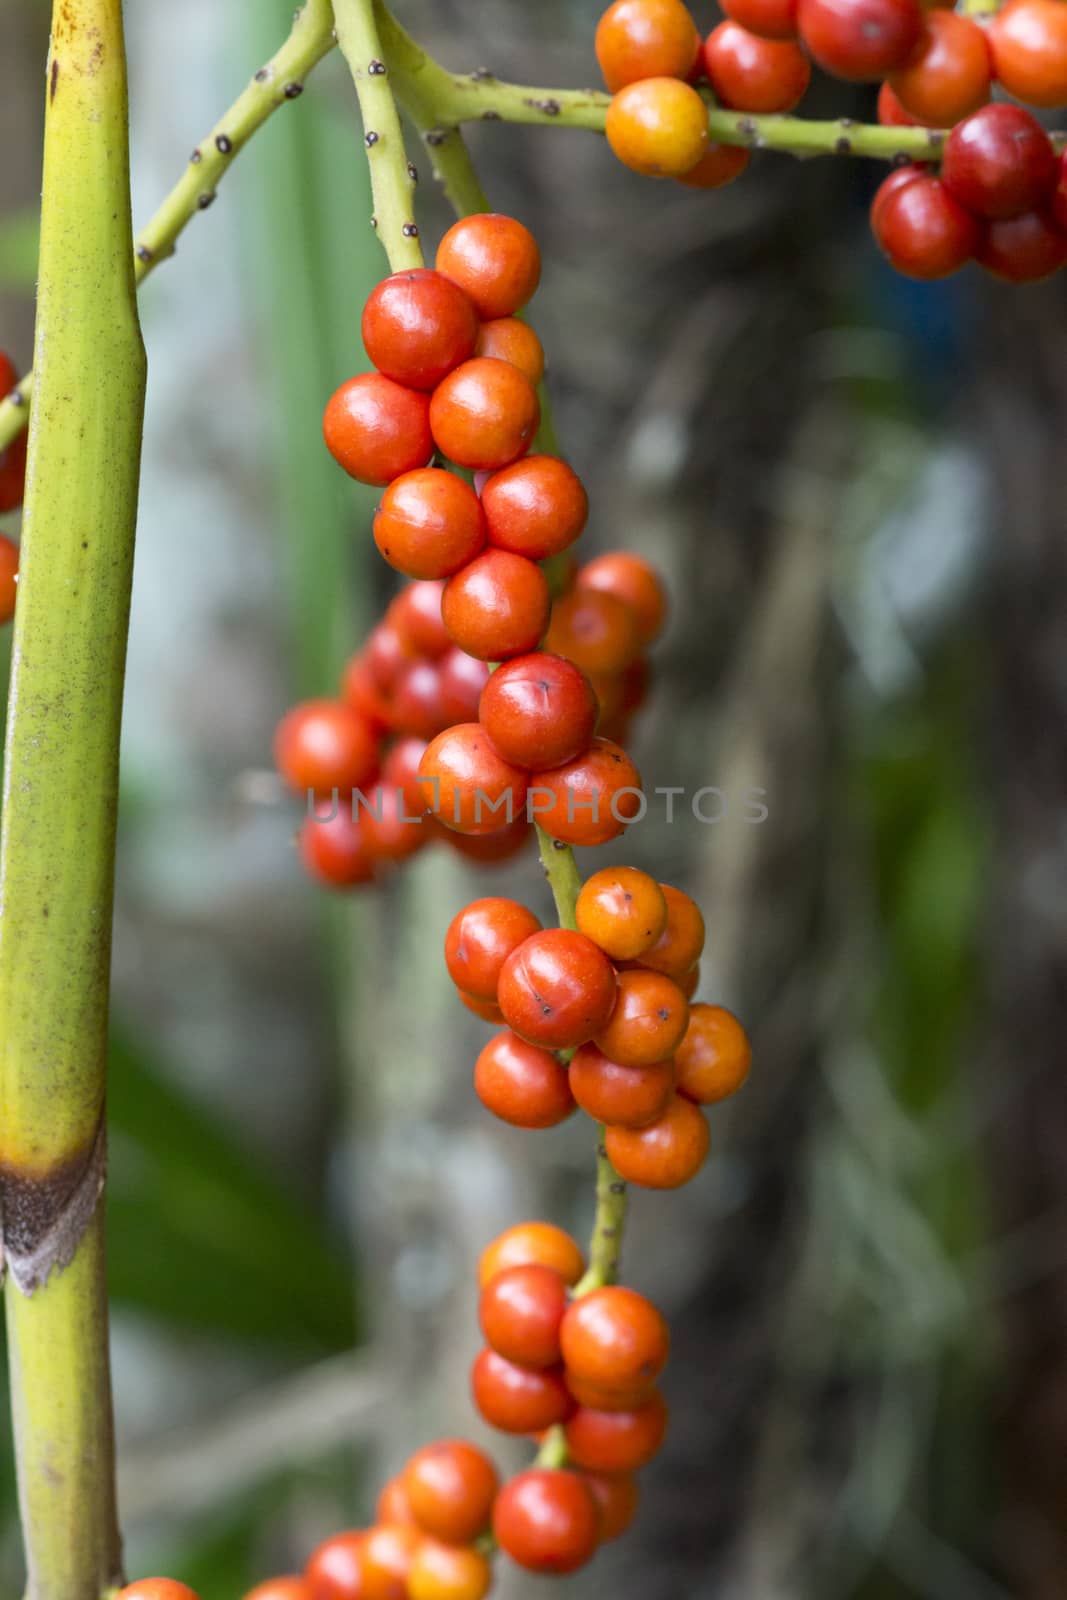 Red seed of Fan palm. (Scientific name: Licuala paludosa Griff.)